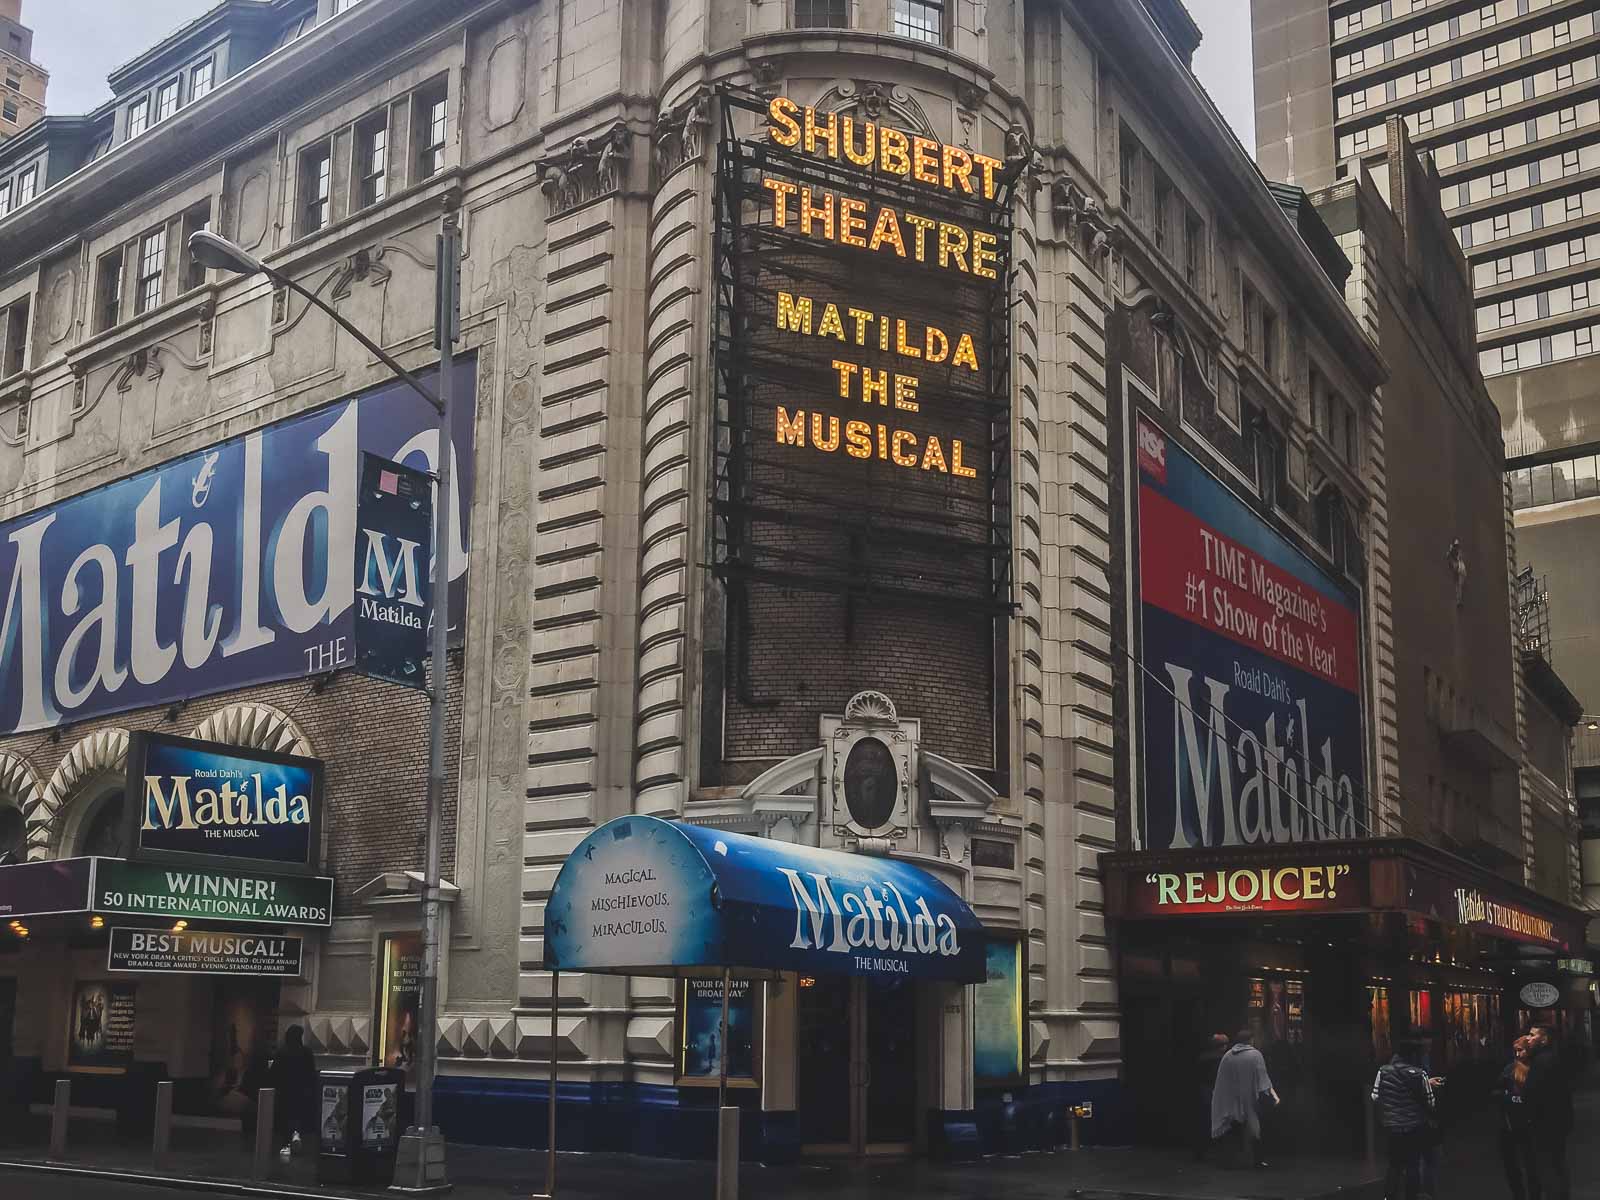 Shubert Alley in Times Square New York City